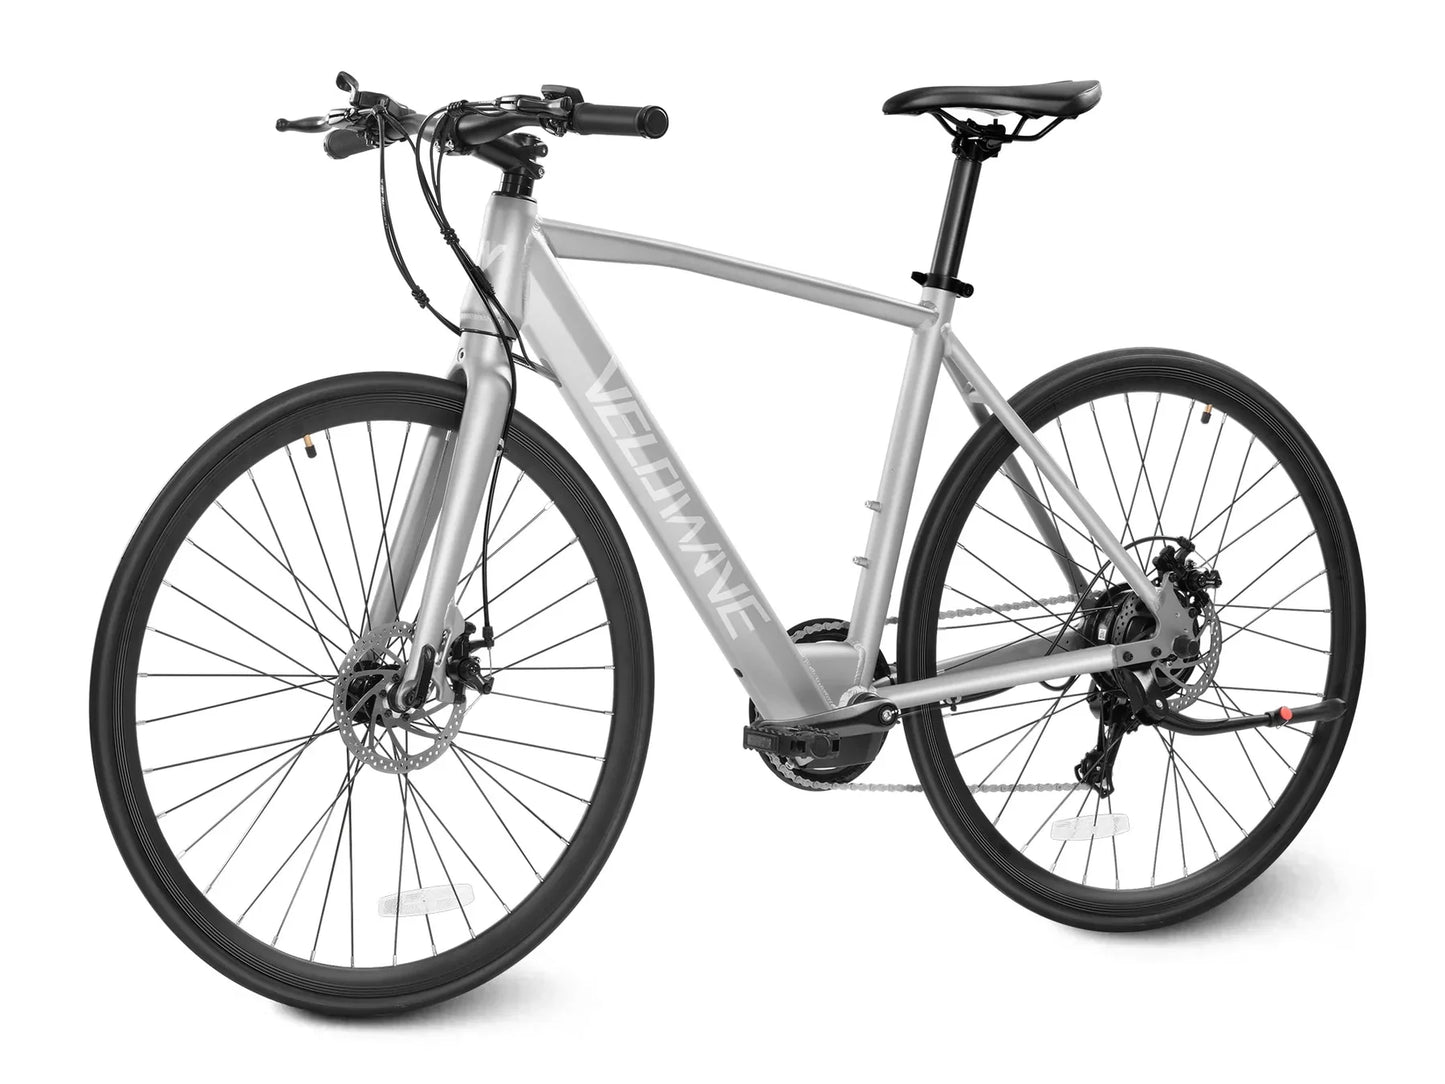 Sleek silver Velowave Spirit Electric Road Bike in urban setting, showcasing its lightweight design and advanced features for efficient city commuting.